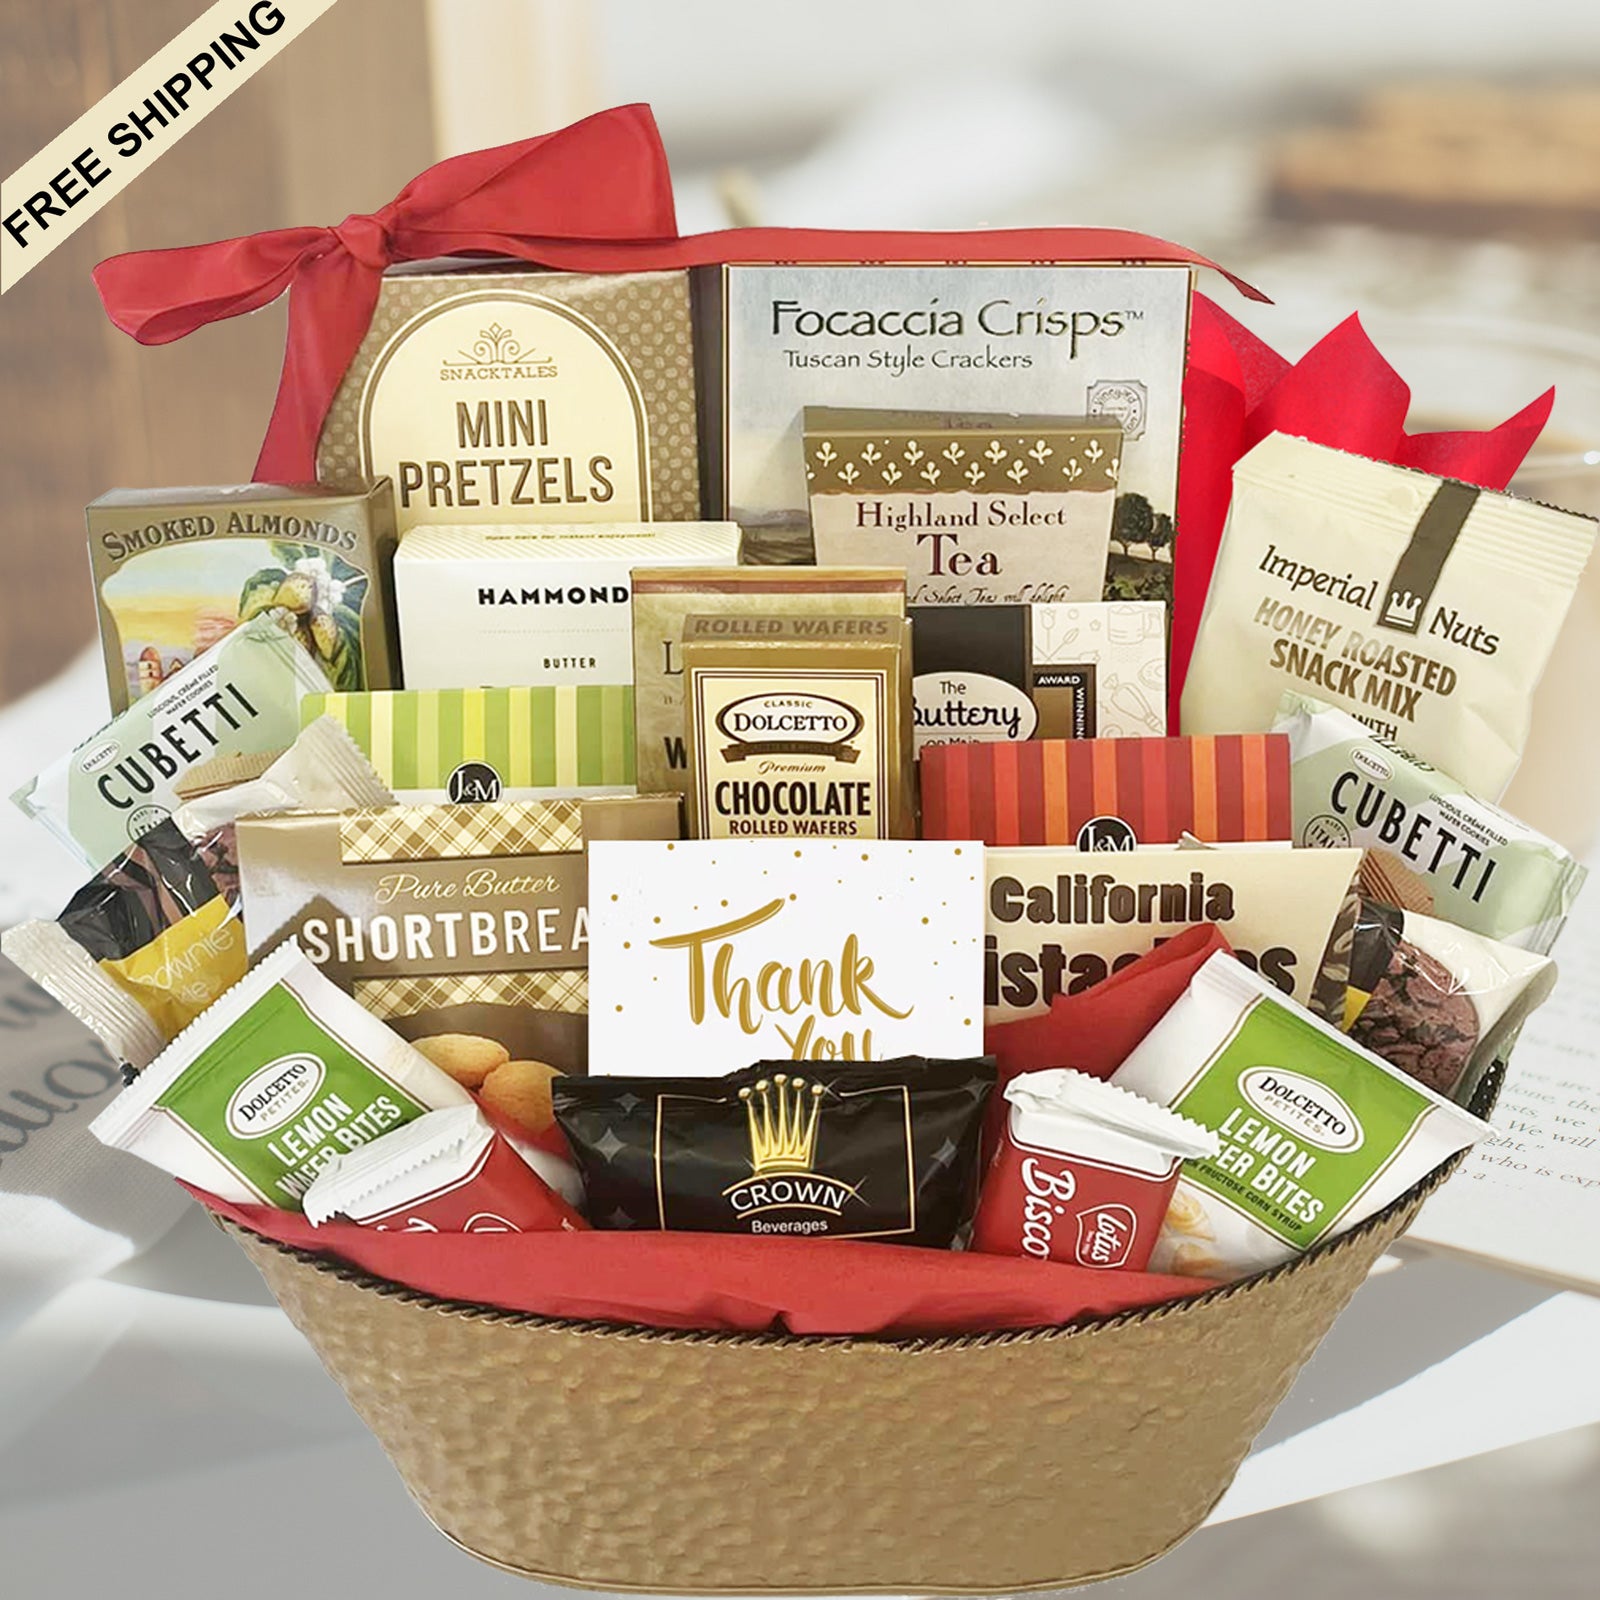 Grand Gourmet Thank You Gift Basket for Men, Women, Friends, Family, Business Gift to Show Appreciation Includes Thank You Card and Personal Note